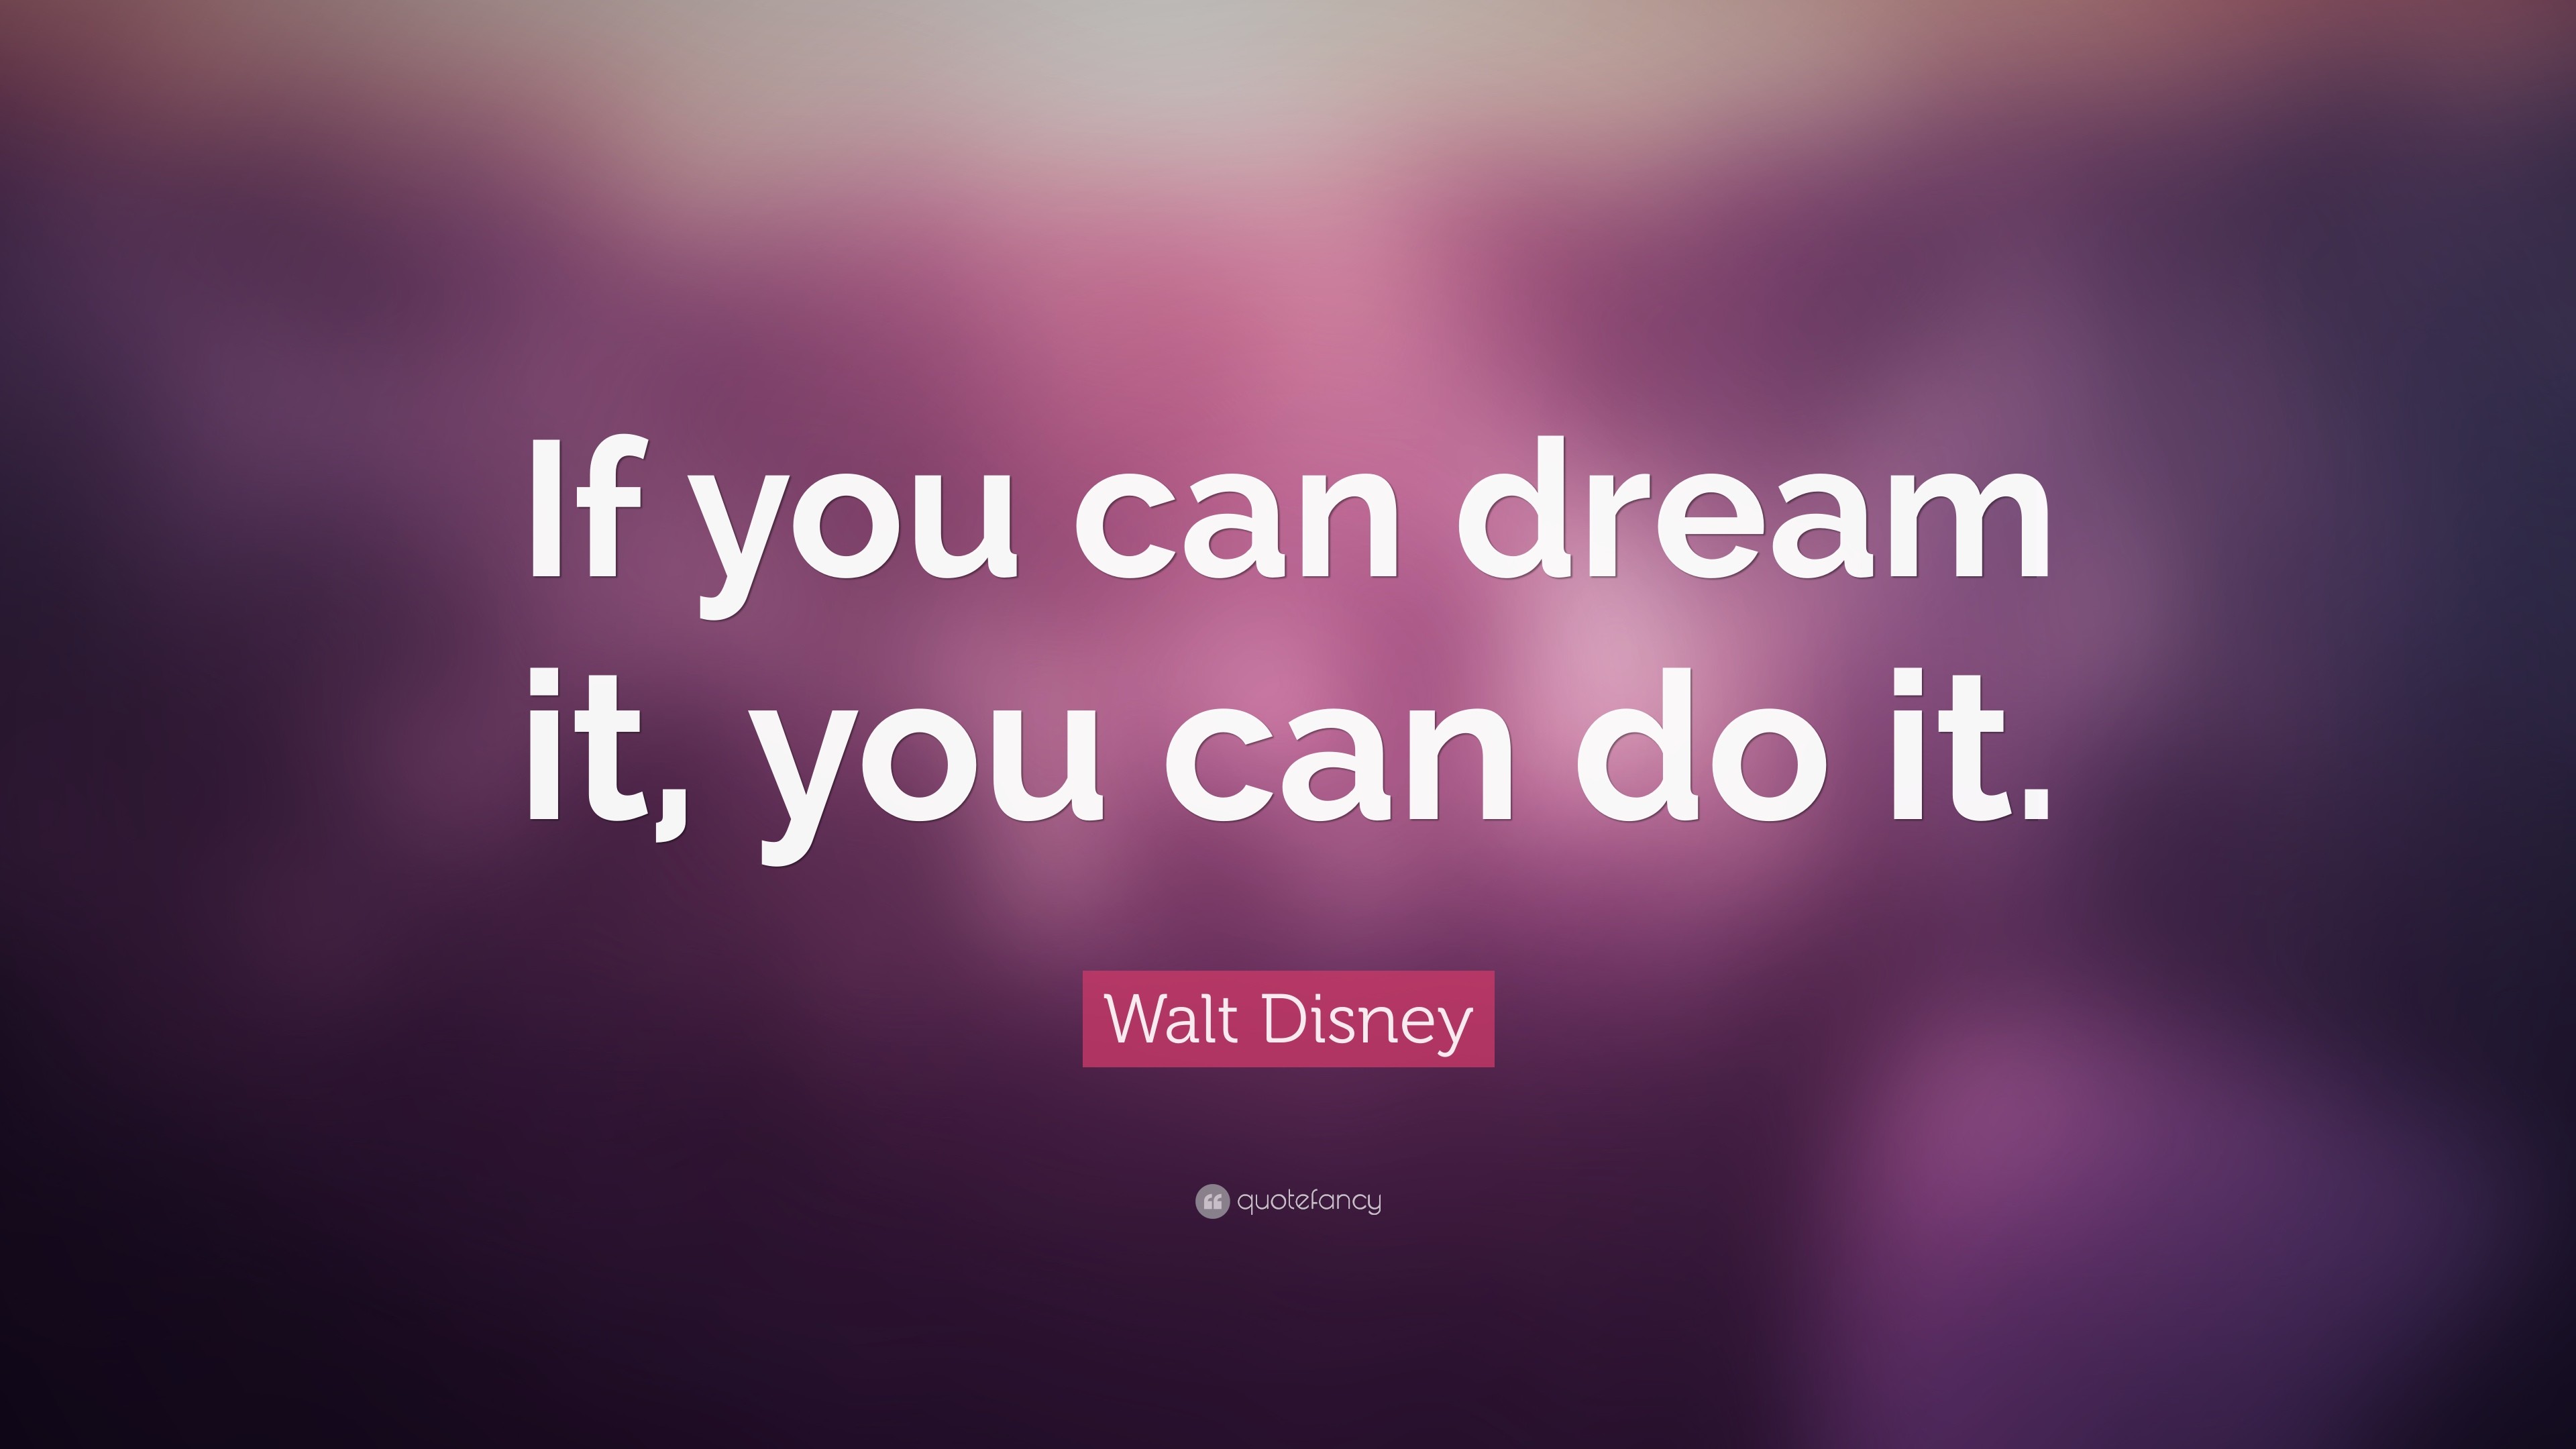 3840x2160 Walt Disney Quote: “If you can dream it, you can do it.